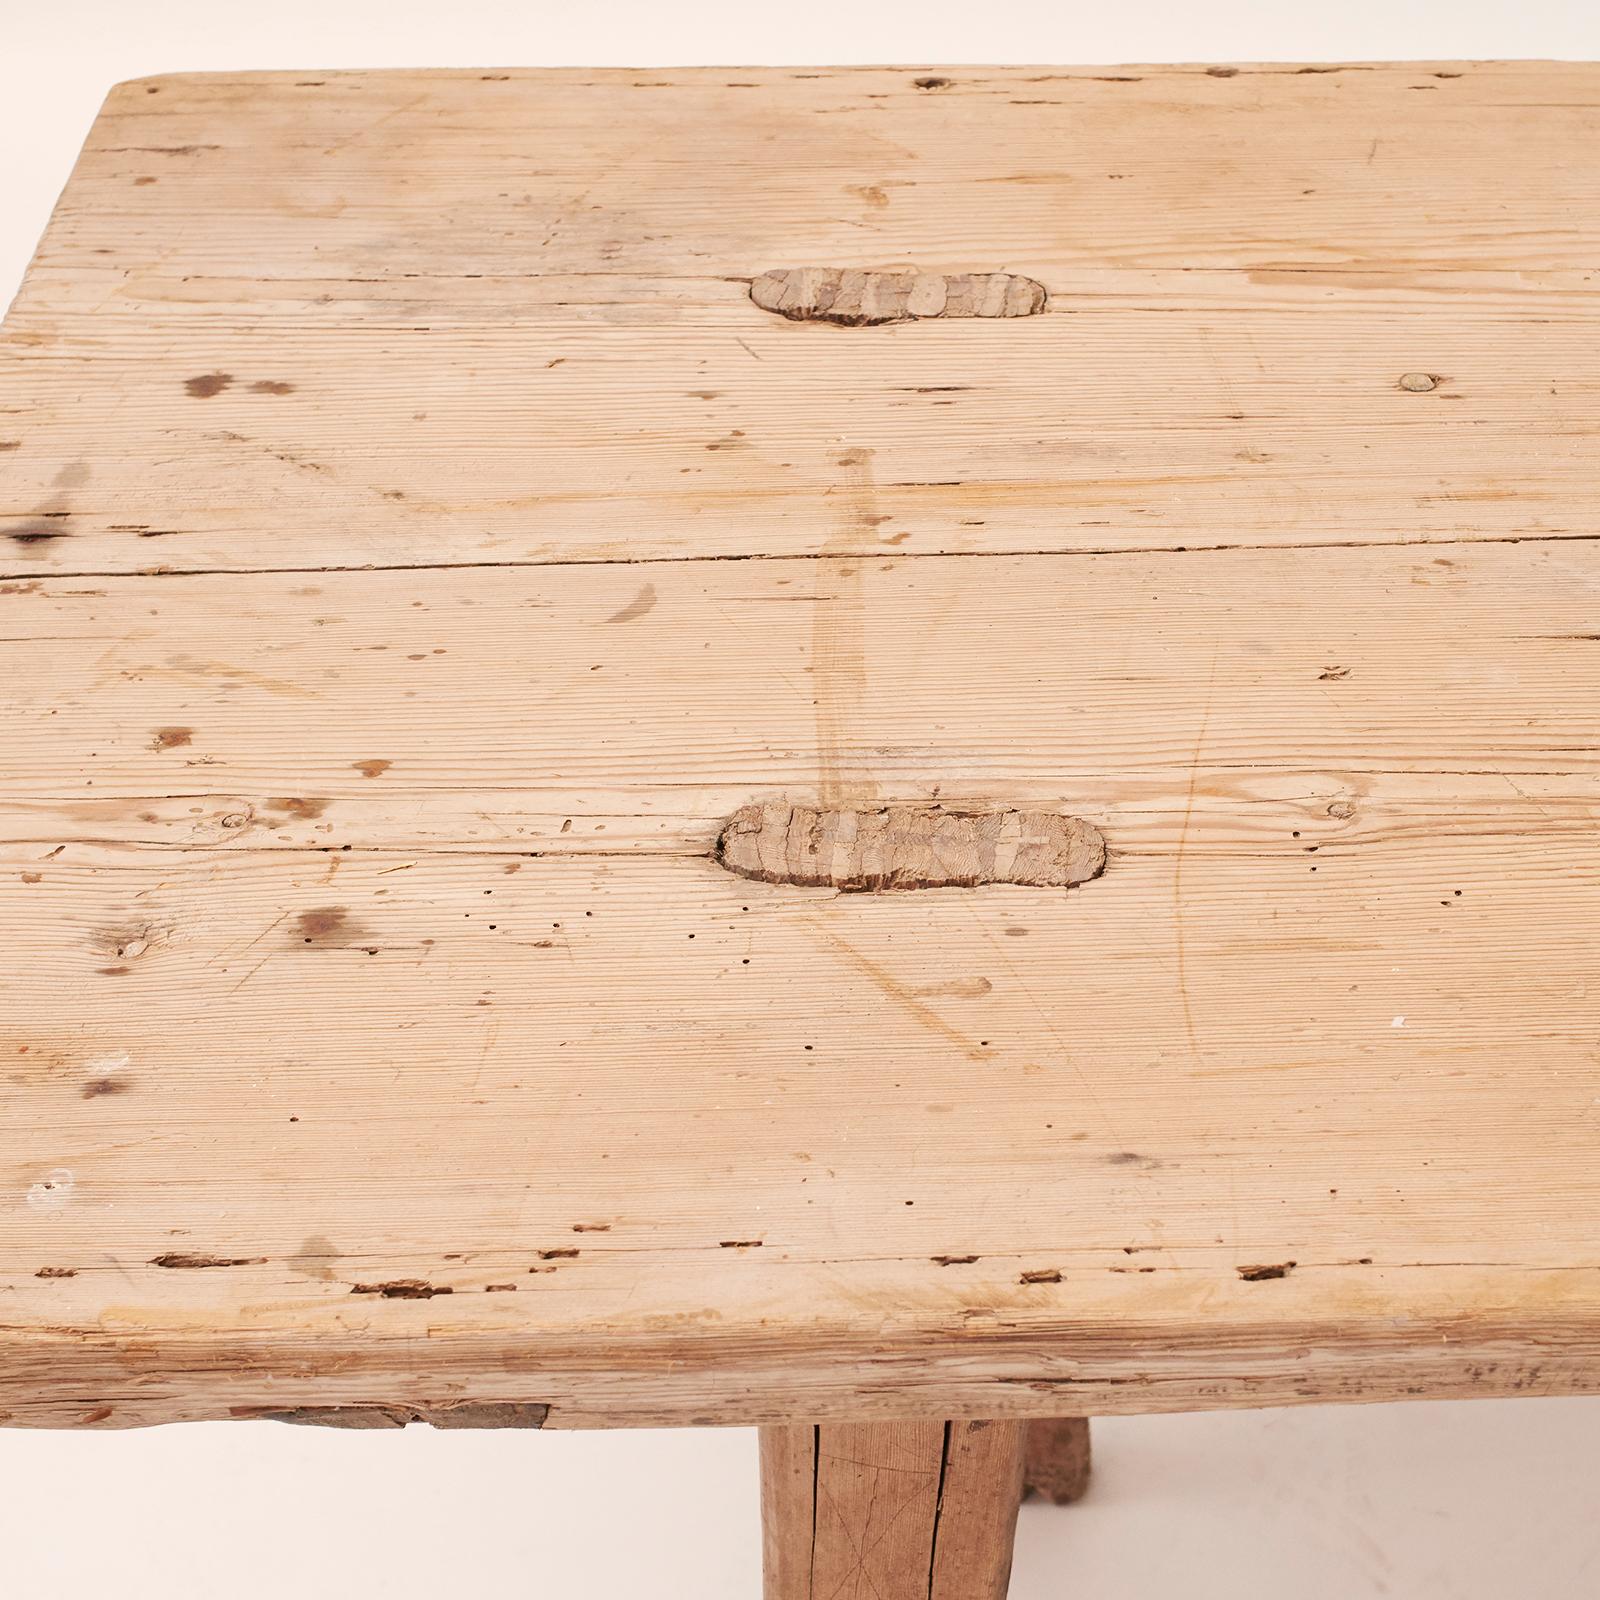 Other Rare 18th Century Table from Nordland, Sweden